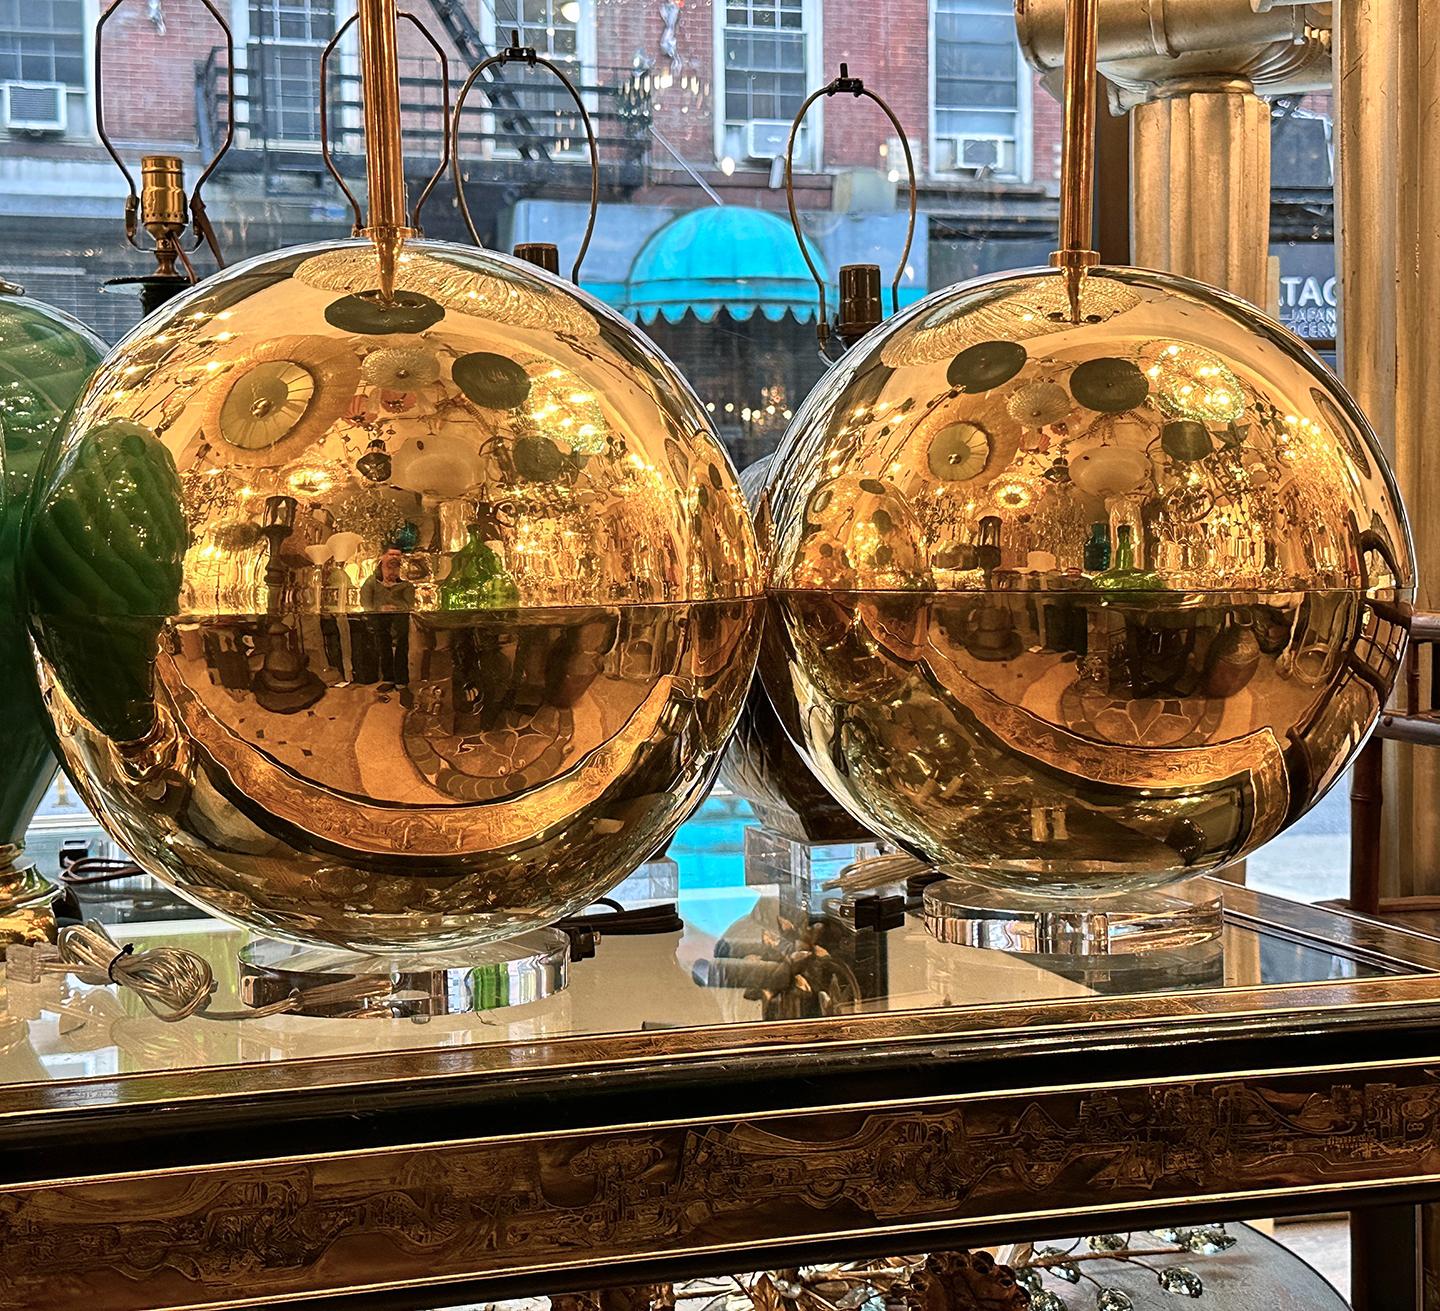 Pair of Italian circa 1970's large, polished bronze sphere lamps with lucite bases.

Measurements:
Height of body: 17